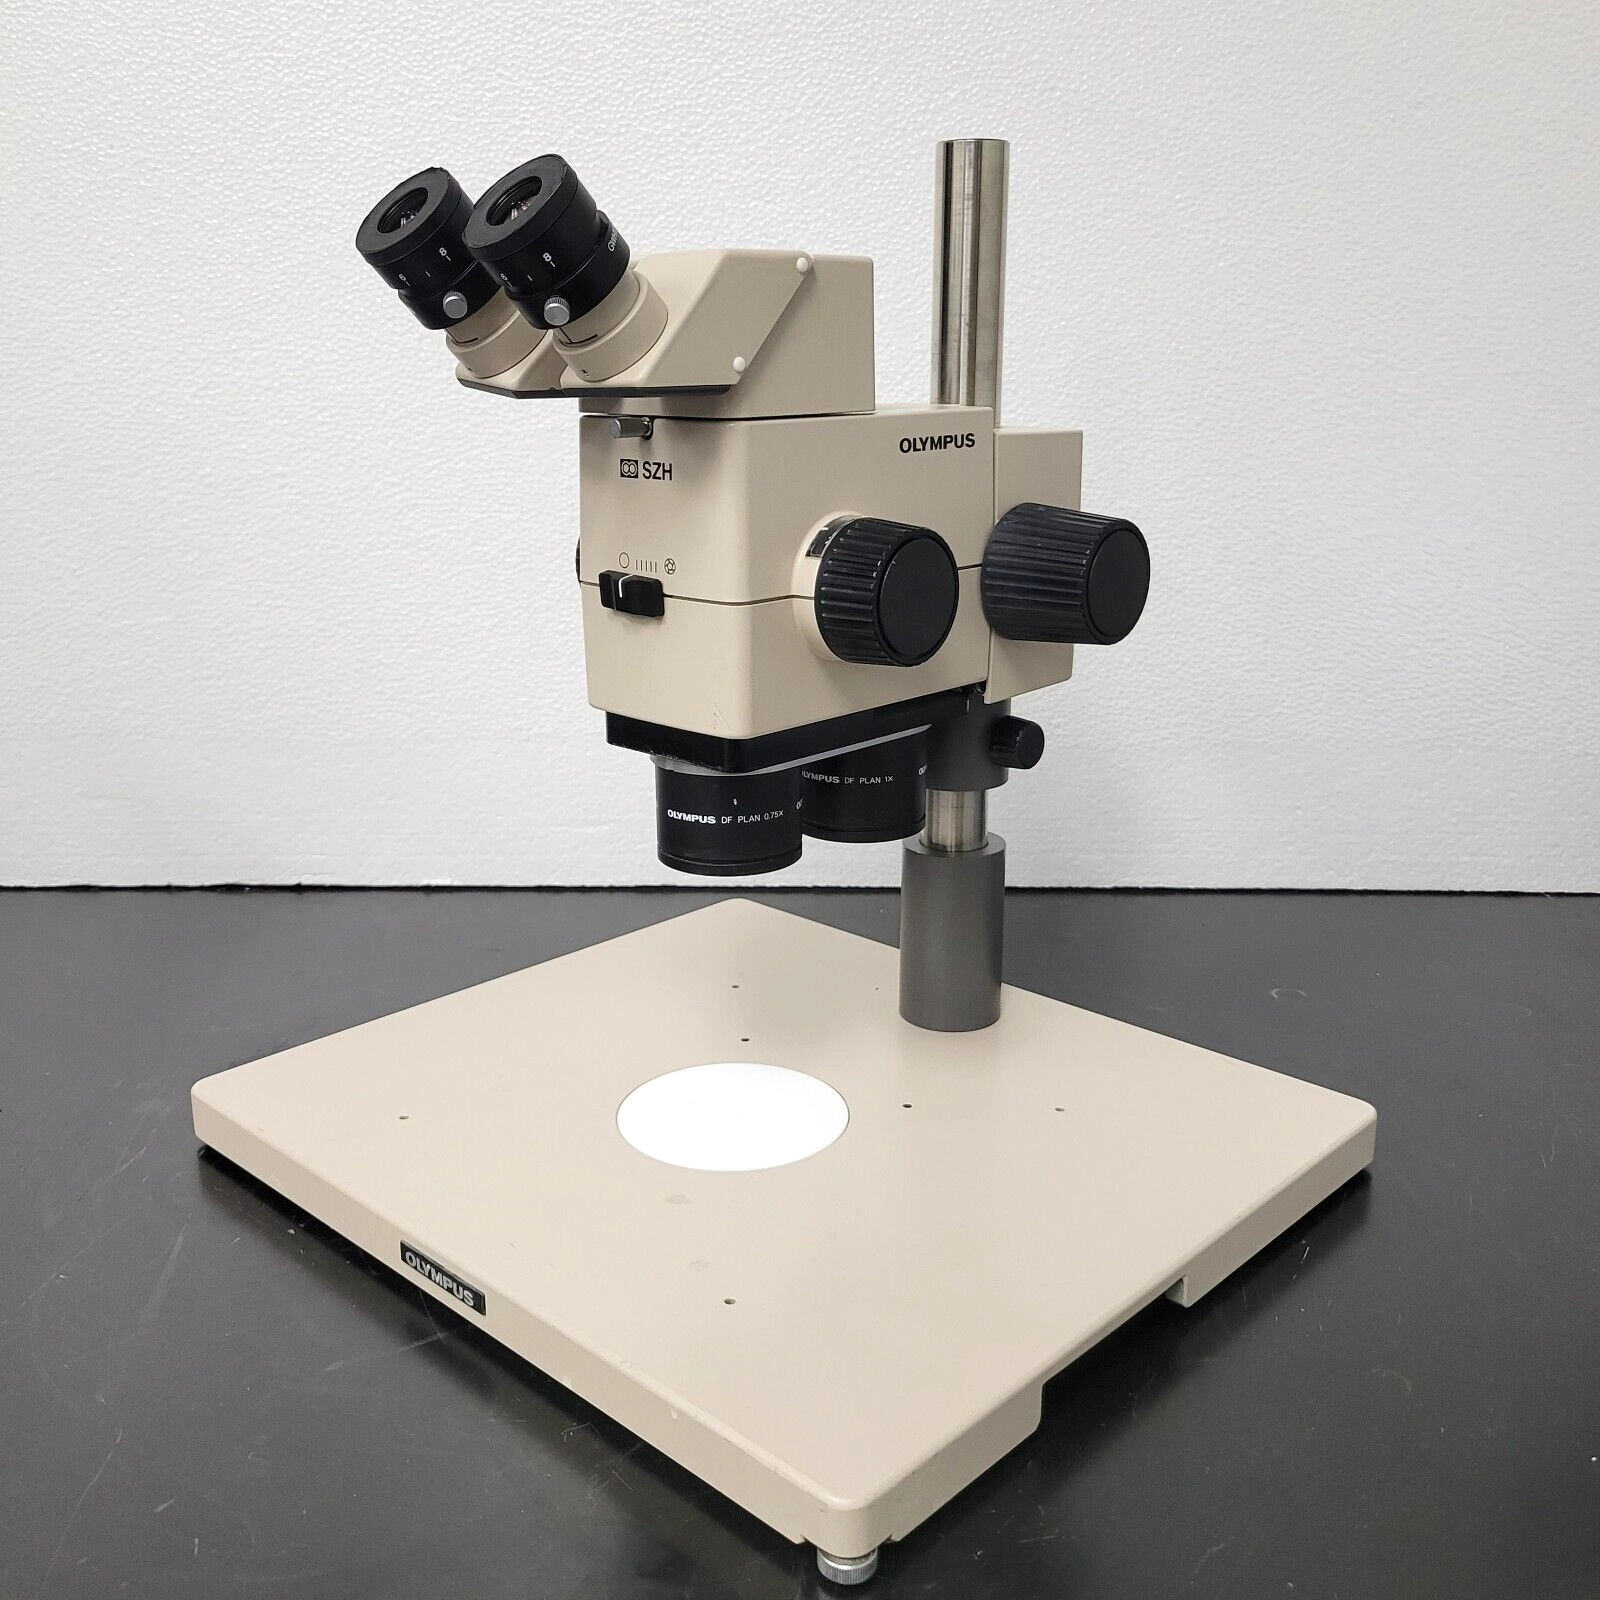 Olympus Stereo Microscope SZH with Dual Nosepiece and Gooseneck Illumination